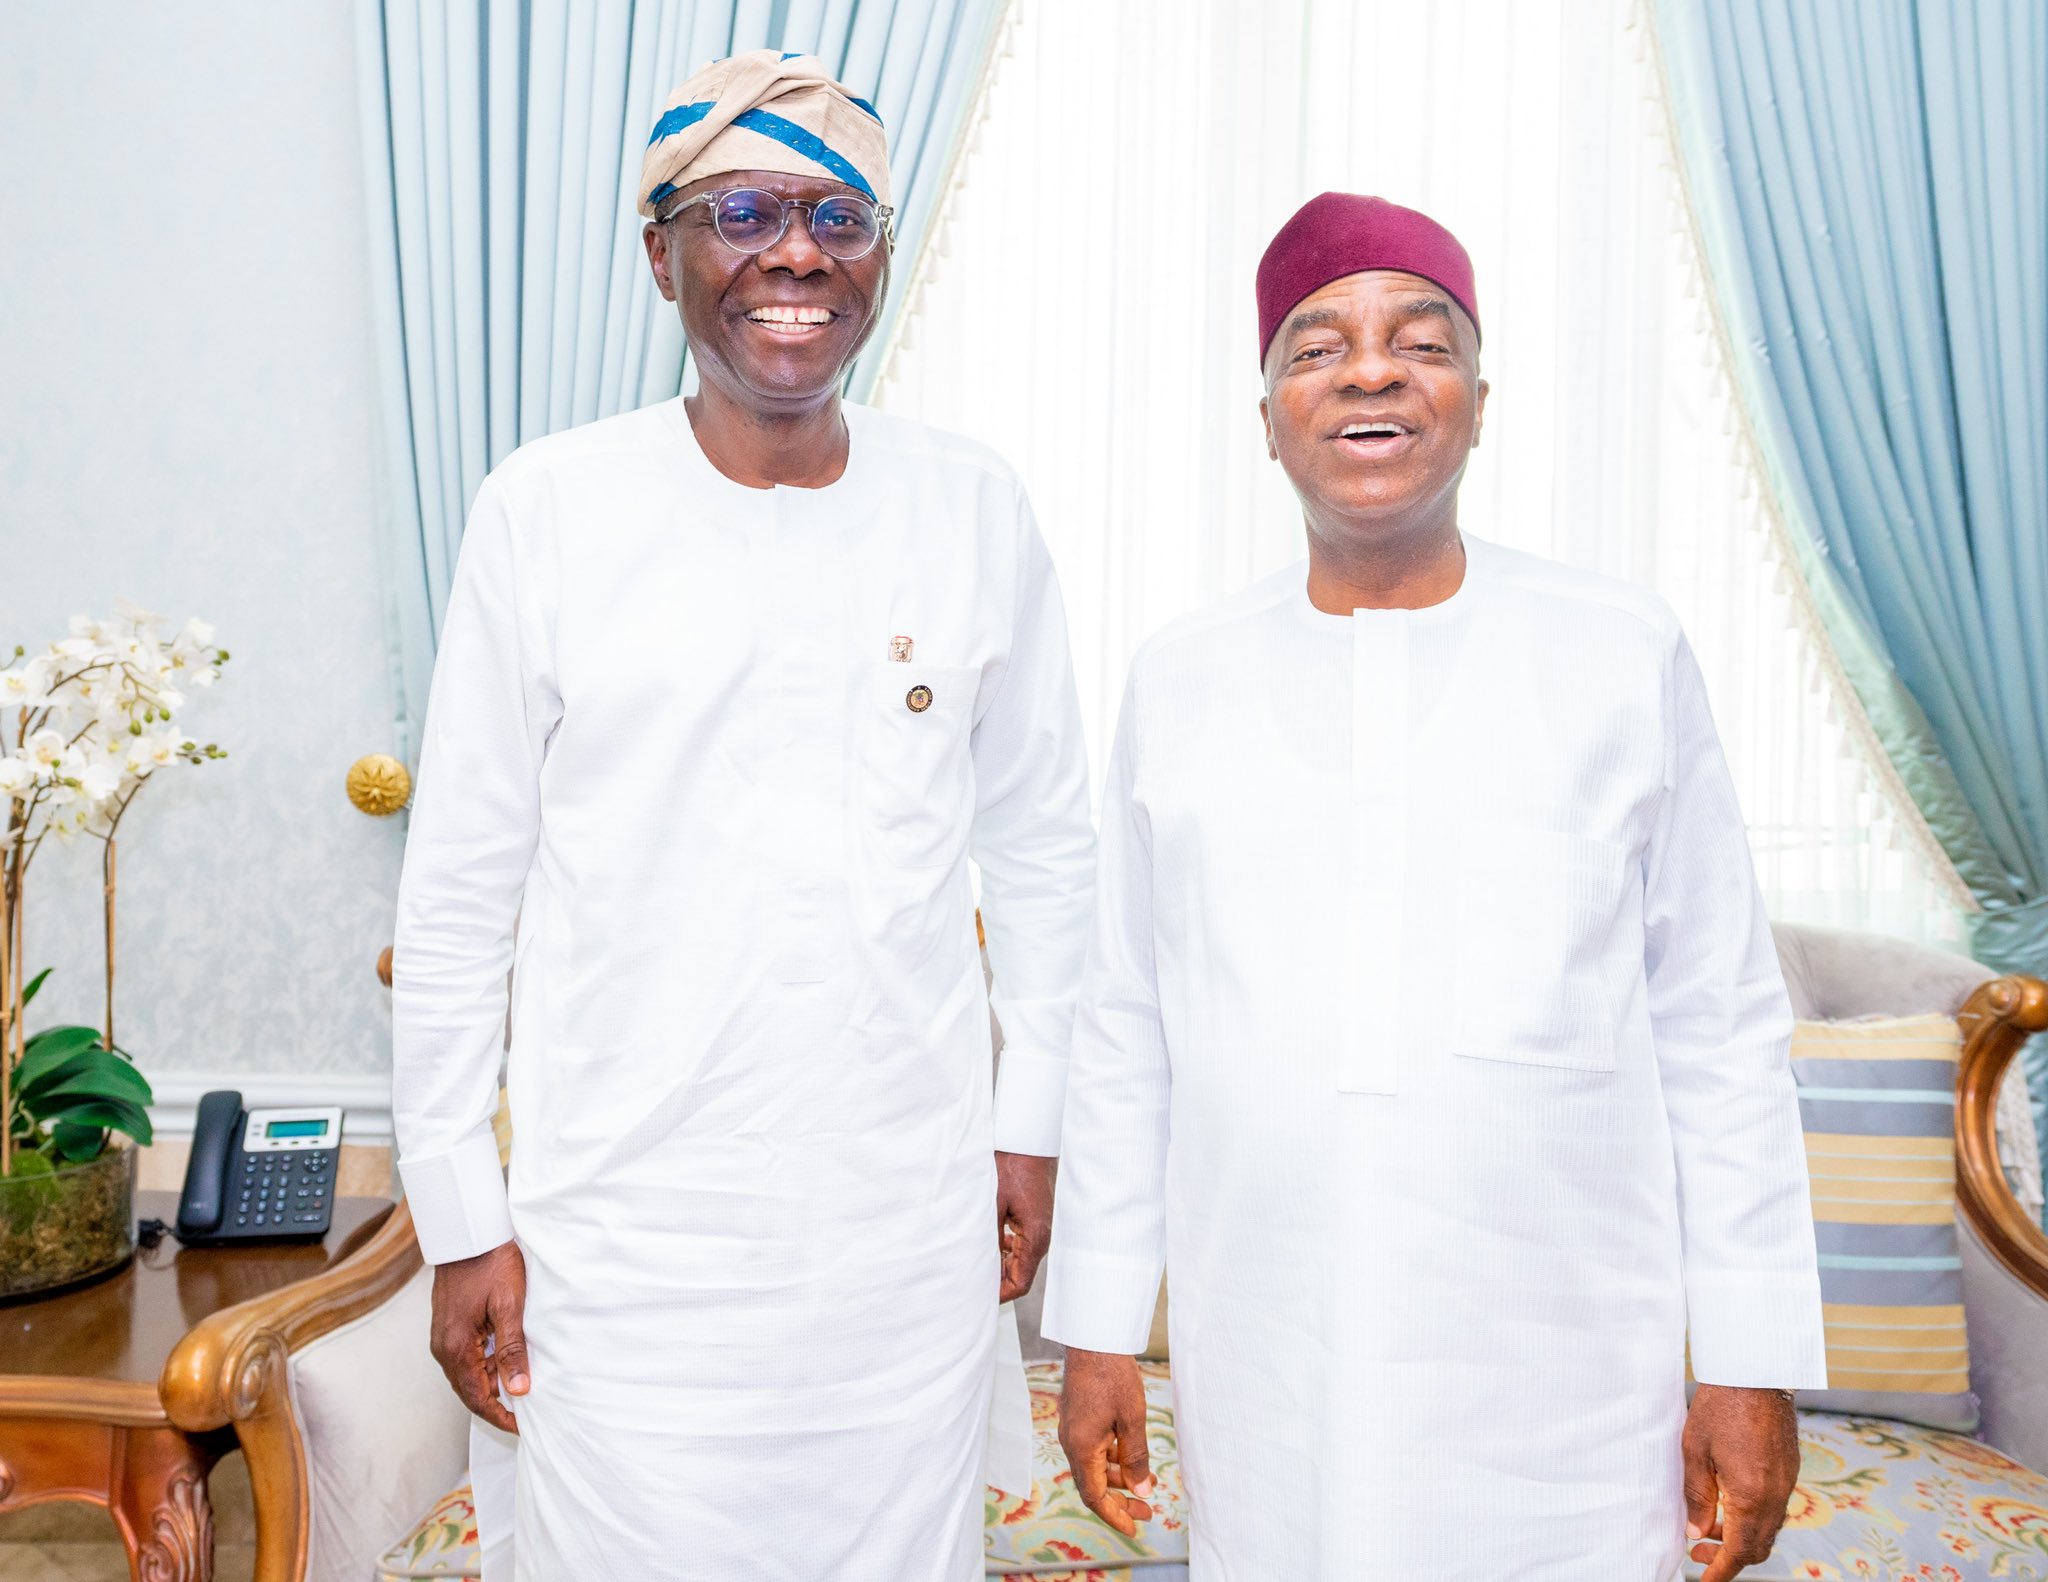 Governor of Lagos State Meets with Bishop David Oyedepo, Founder of Living Faith Church Worldwide  